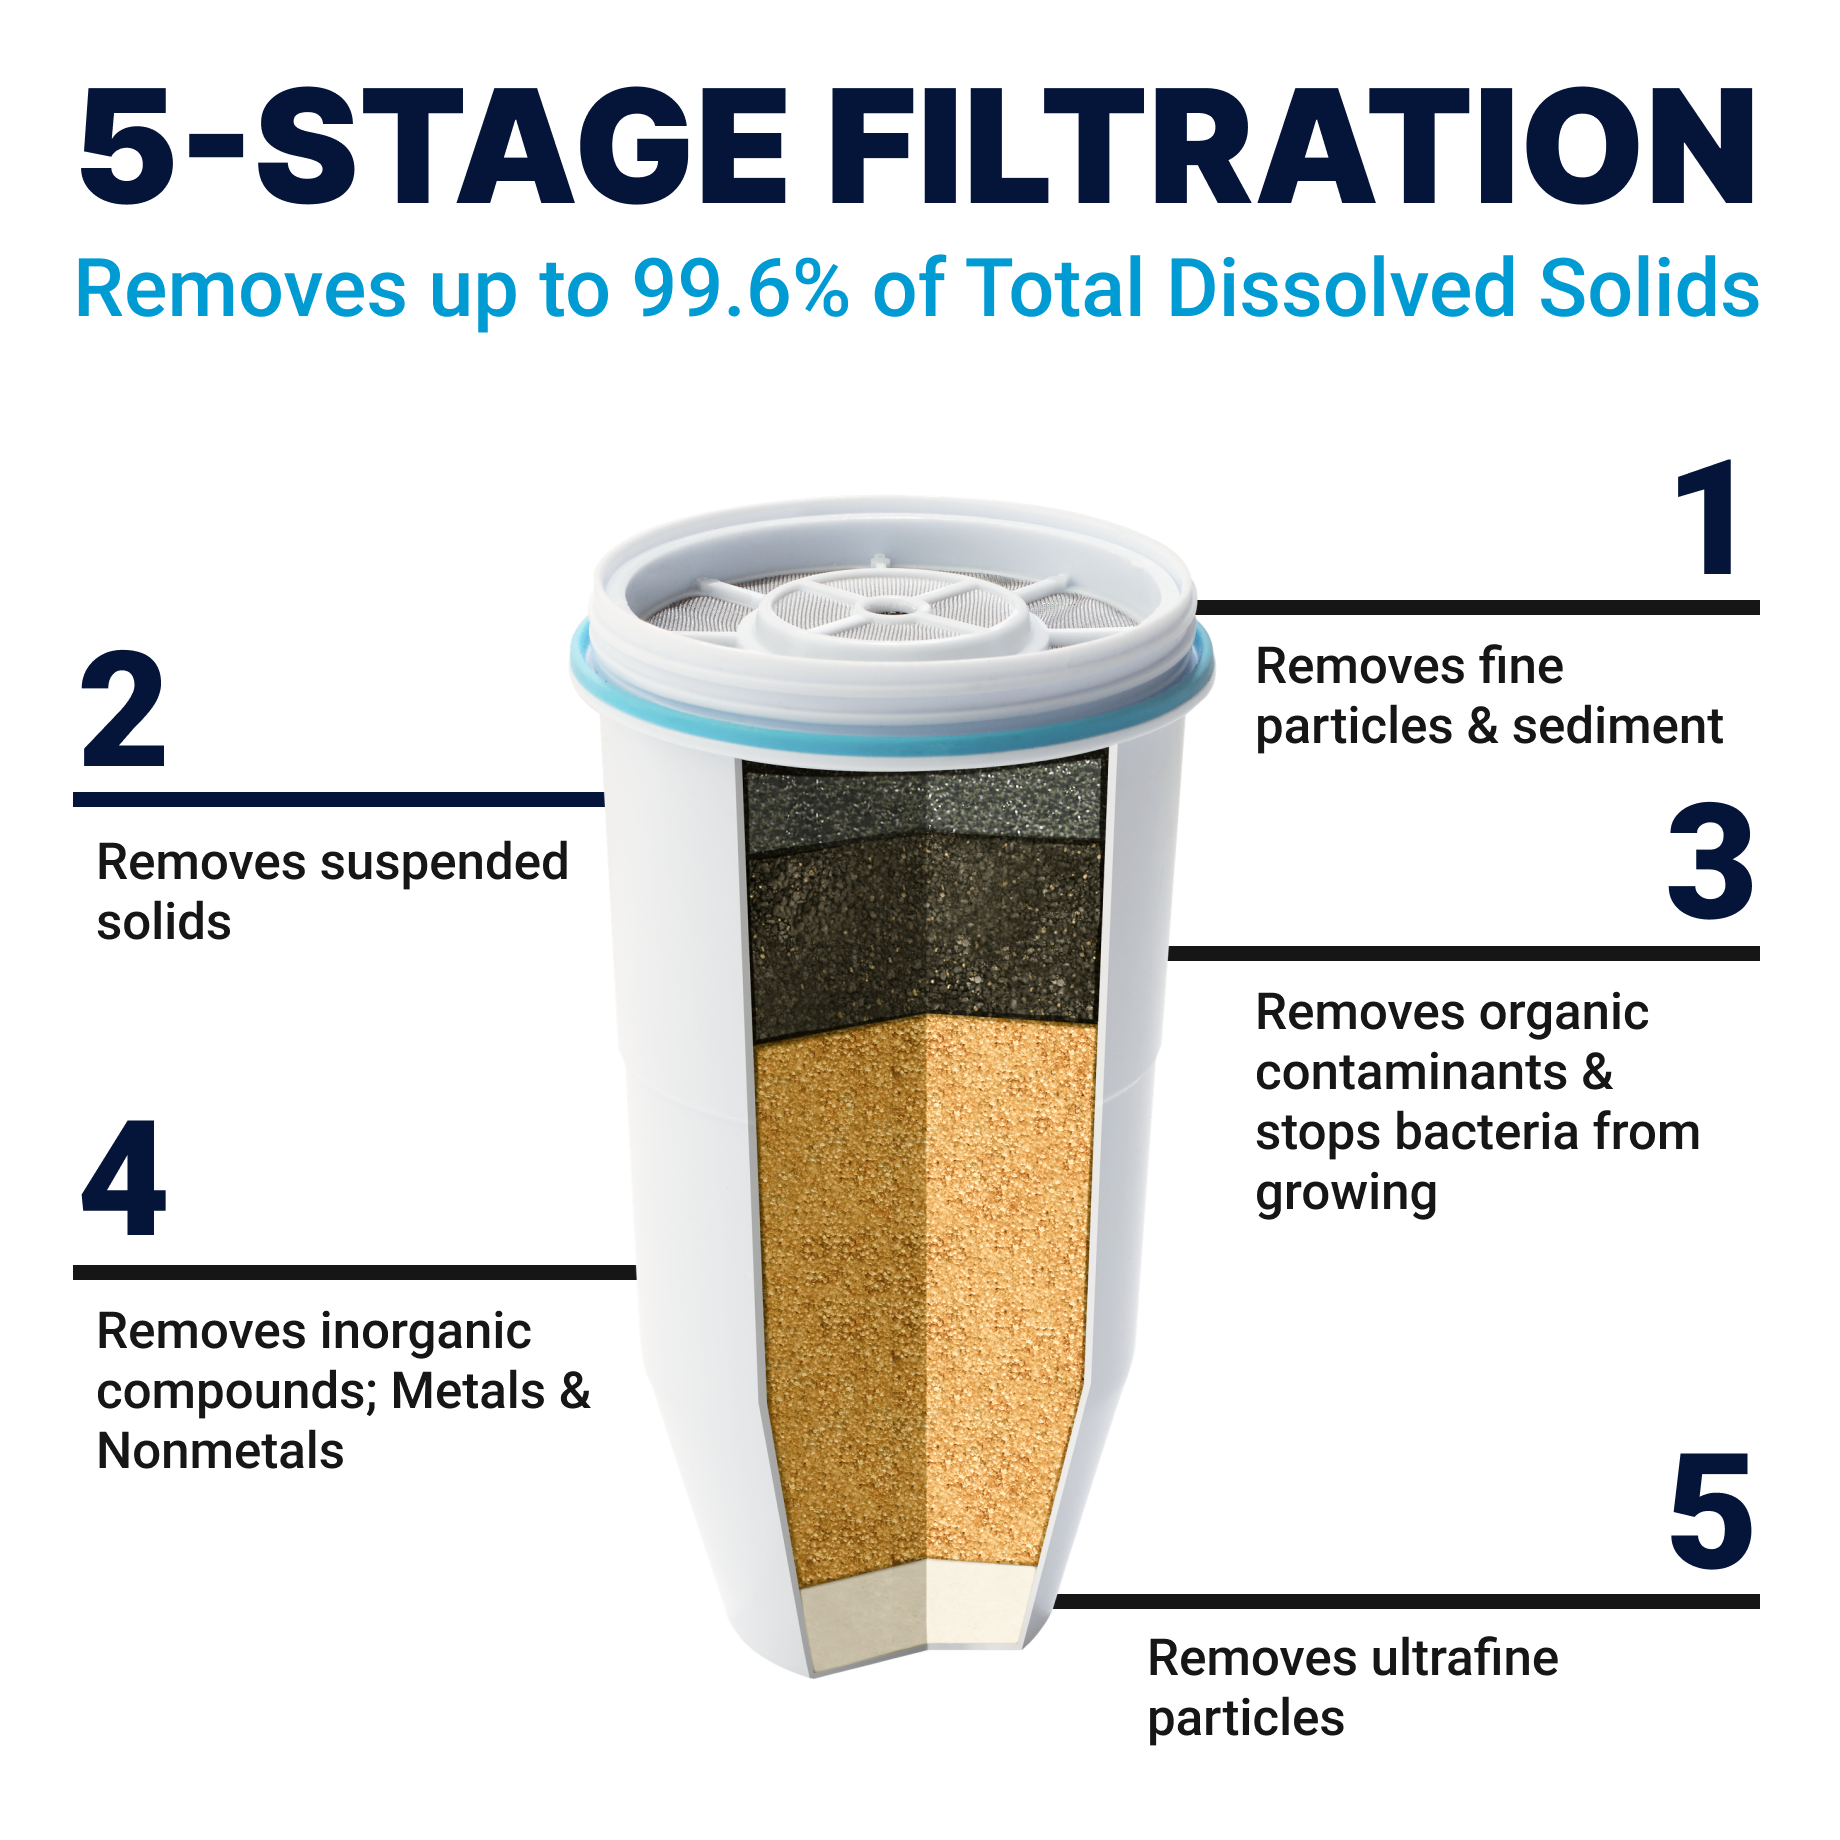 5 stage filtration - removes up to 99.9% total dissolved solids 